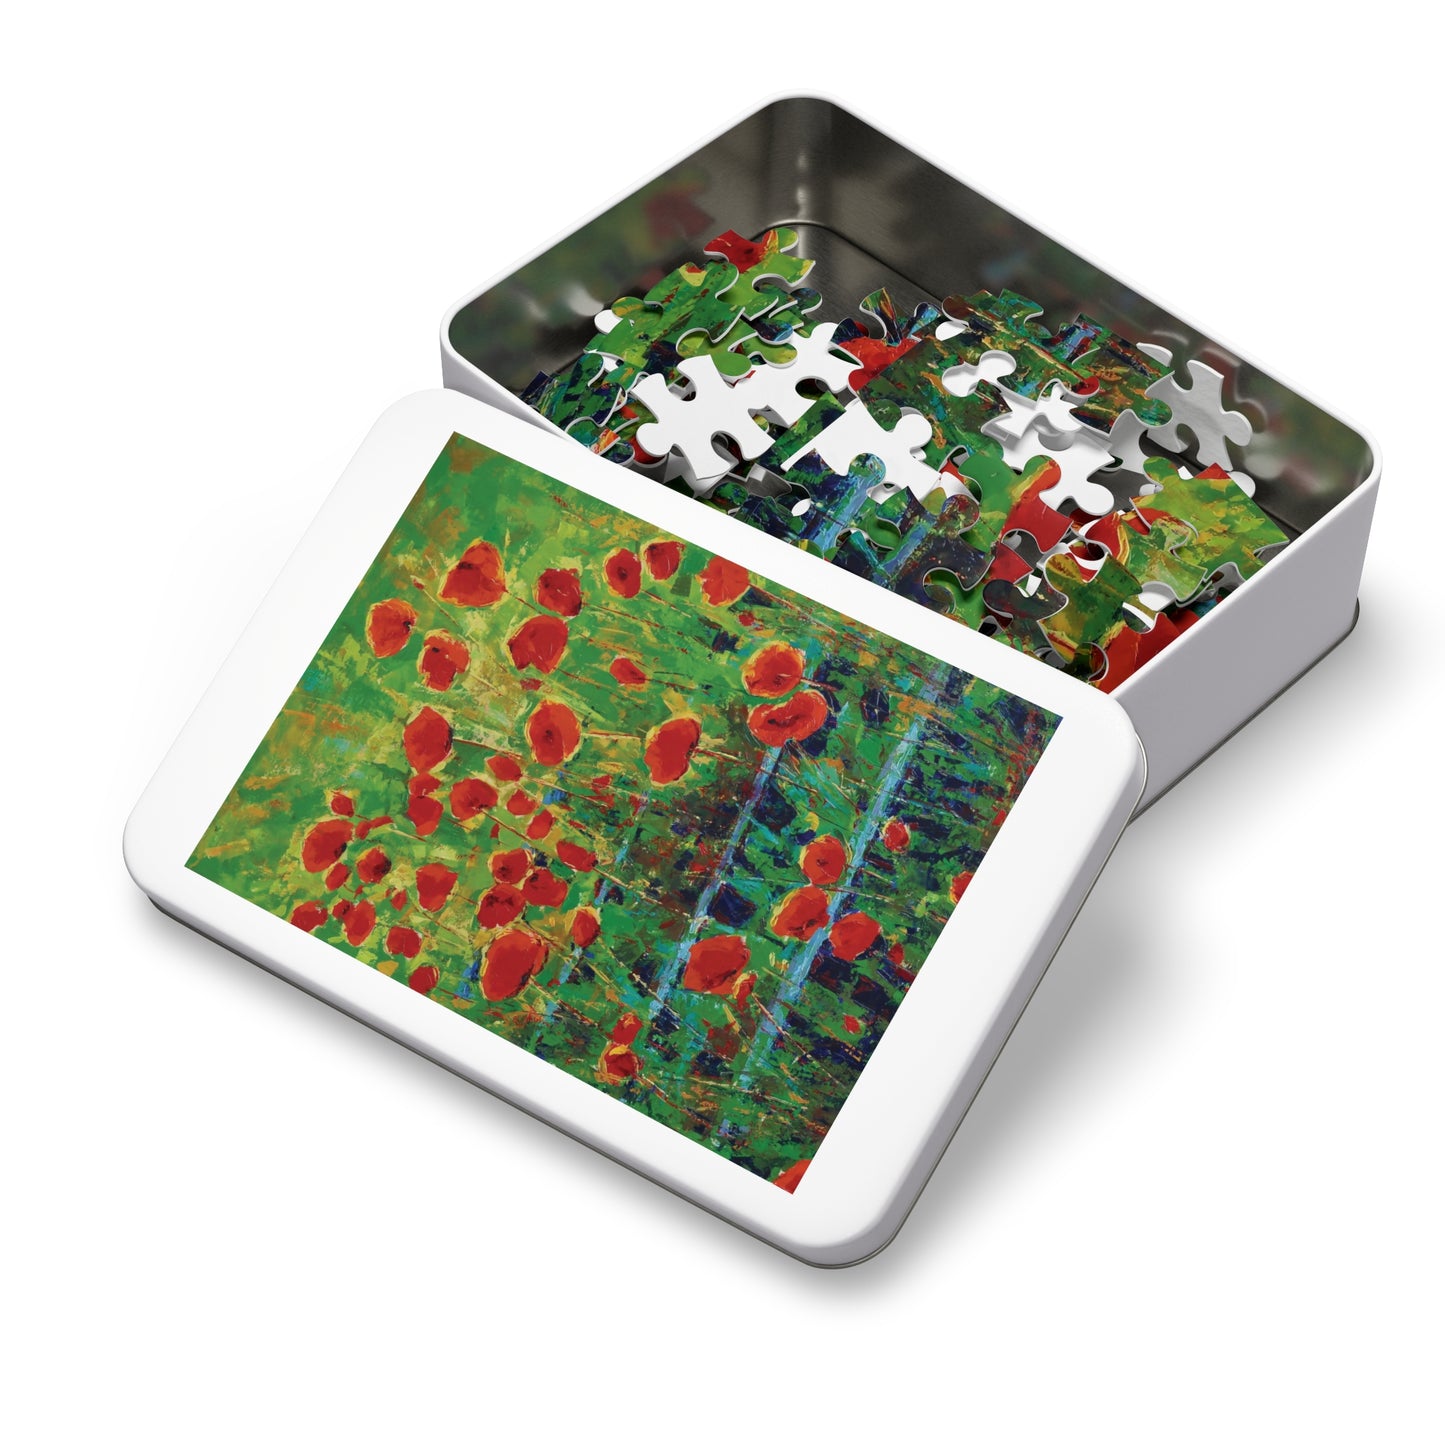 Jigsaw Puzzle - Poppies and Traverses I